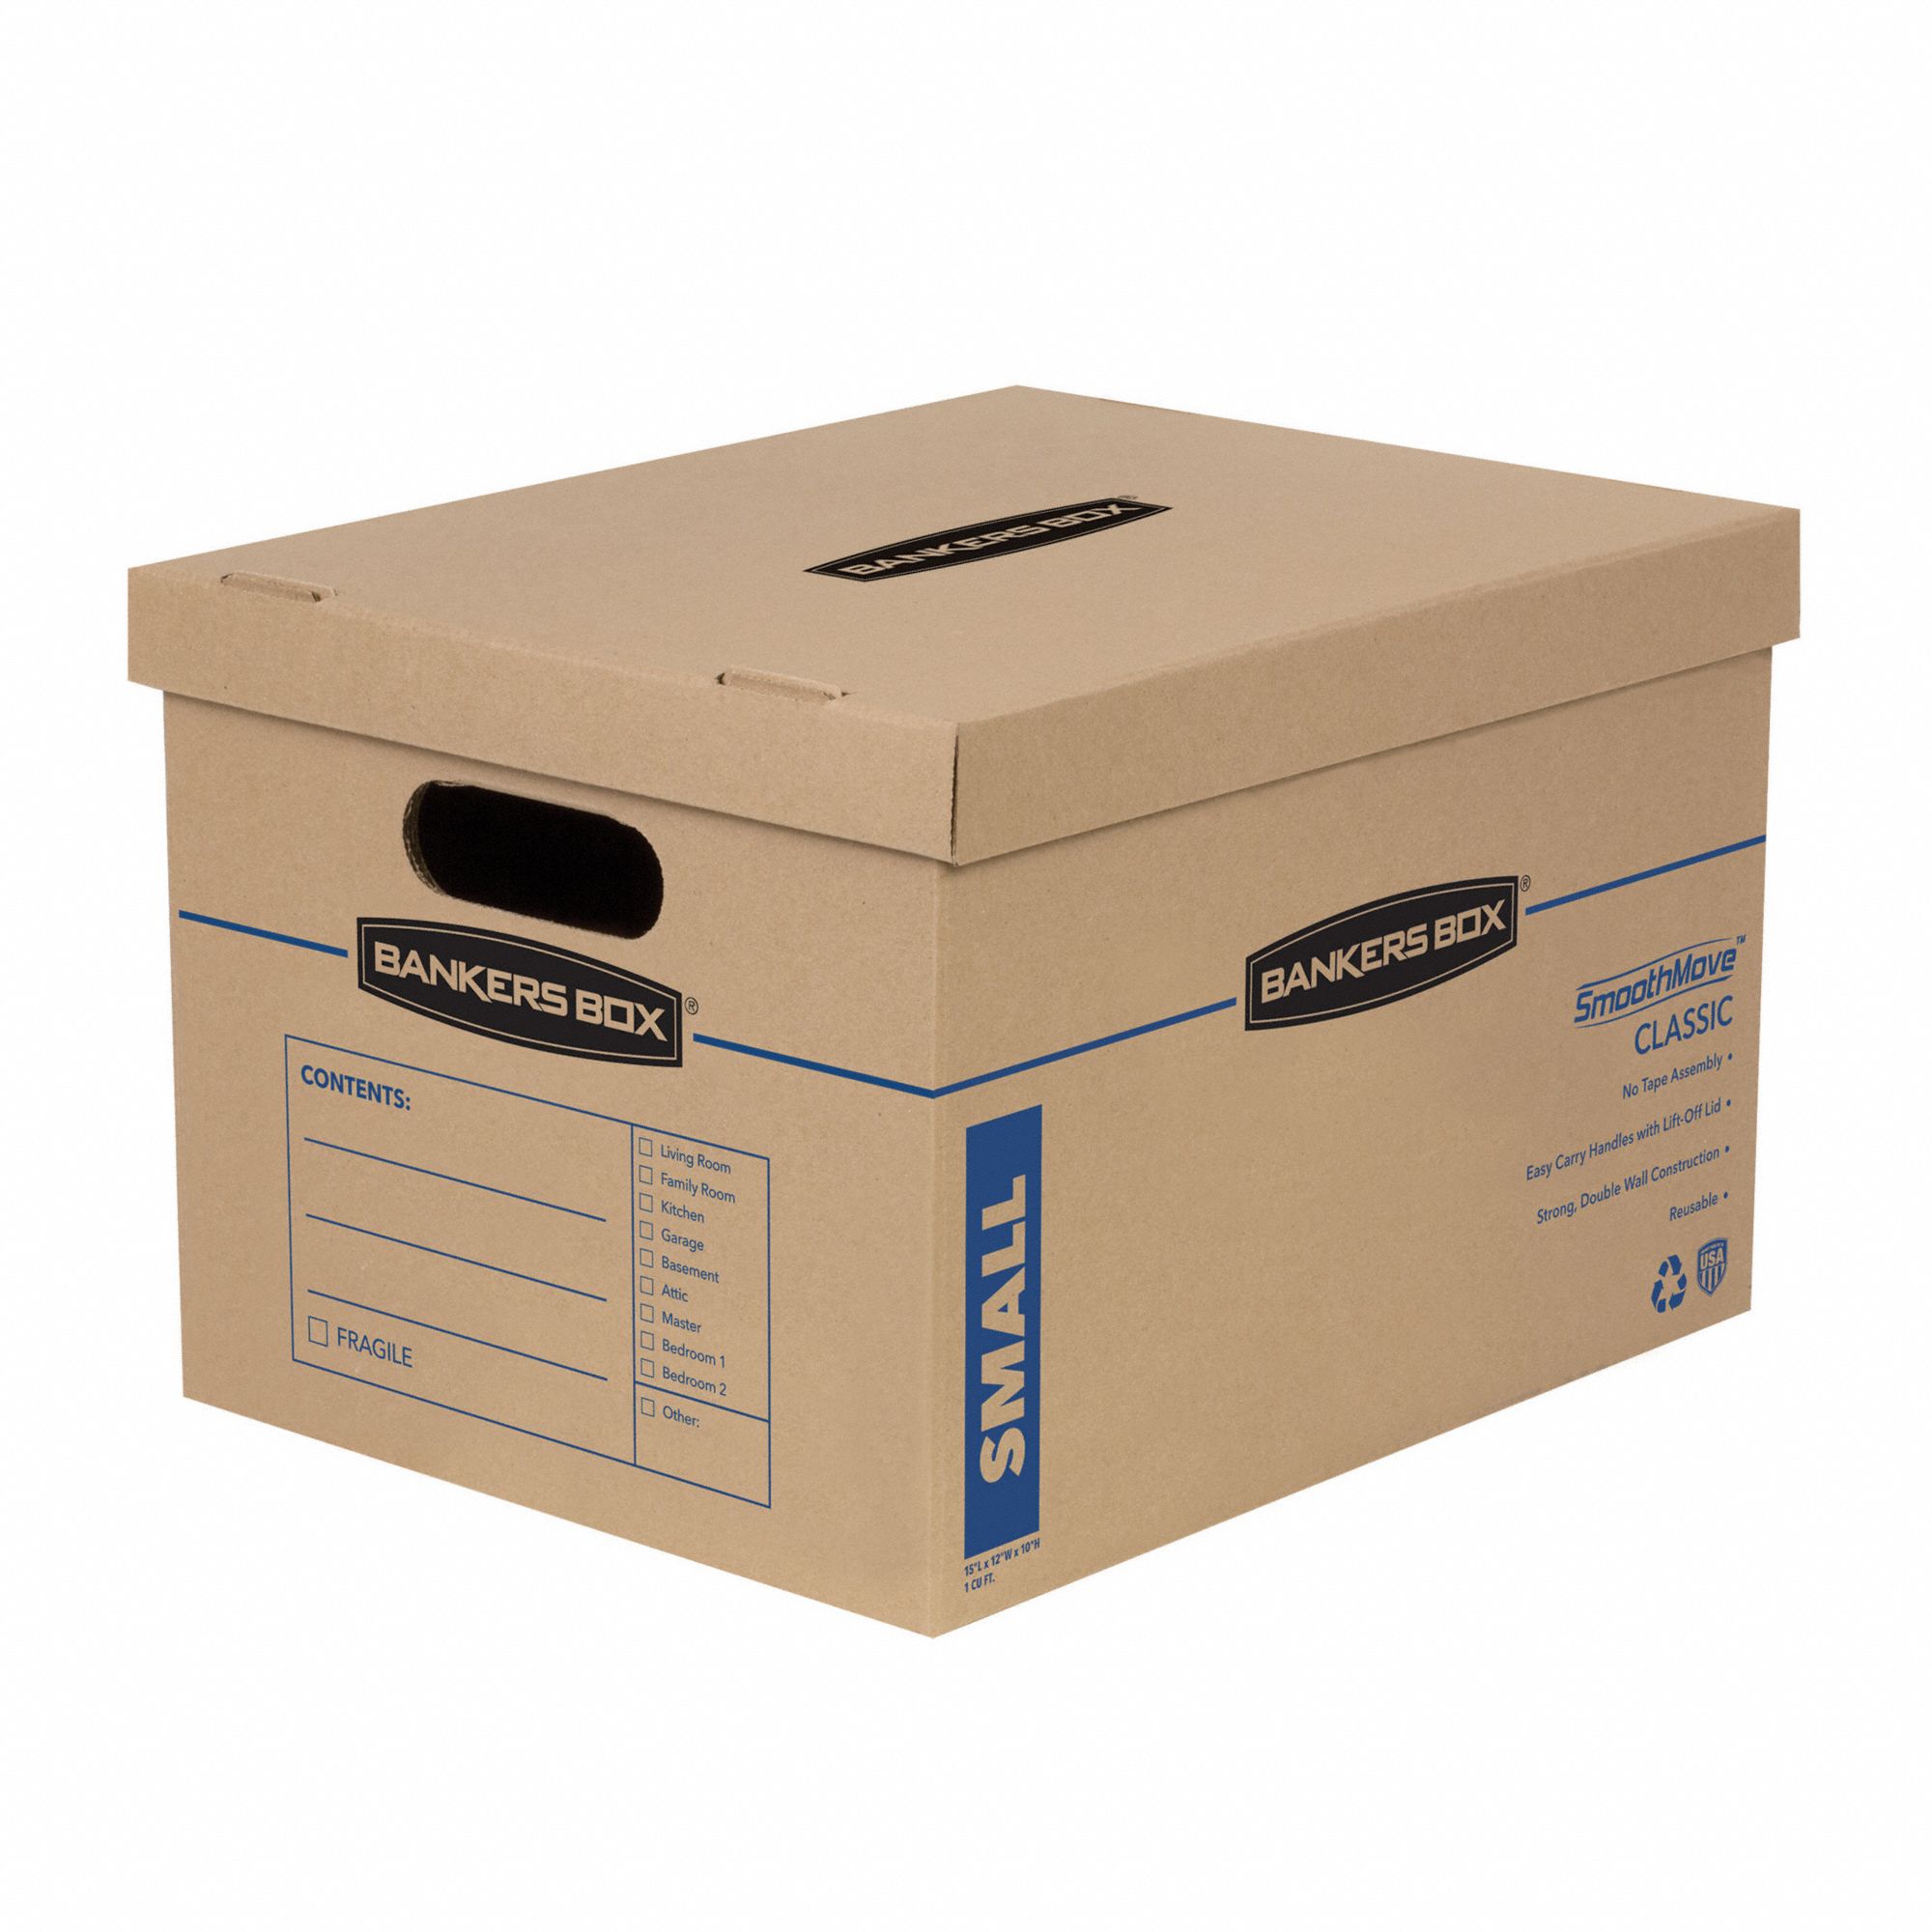 Moving Box: 15x12x10 in, 32 ECT, Double Wall, Classic Moving Box, Lid Closure, 15 PK